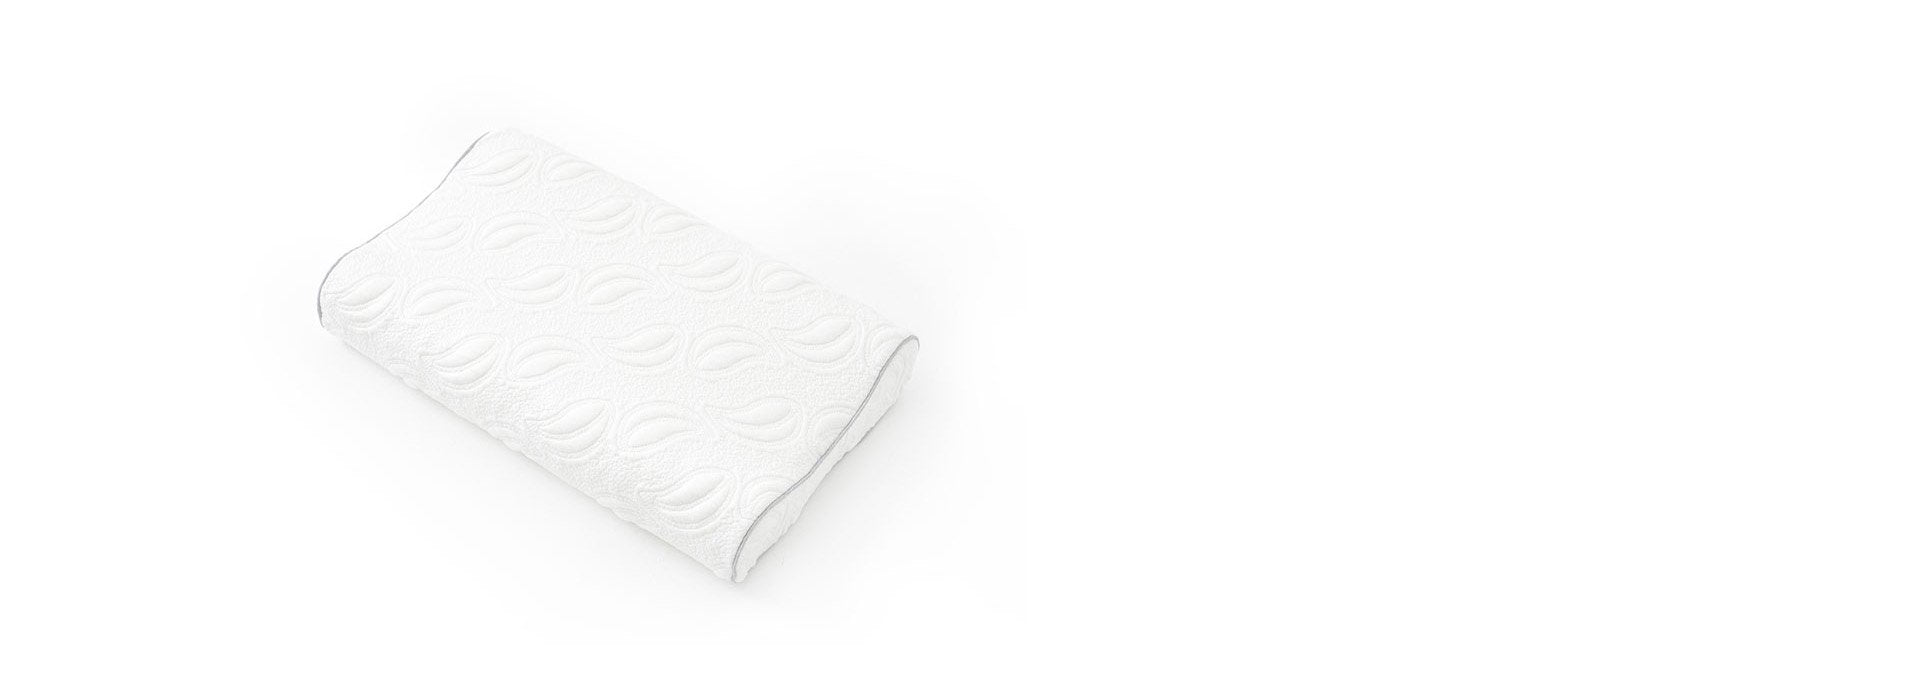 B-shaped Fullair Pillow with breathable cover. 